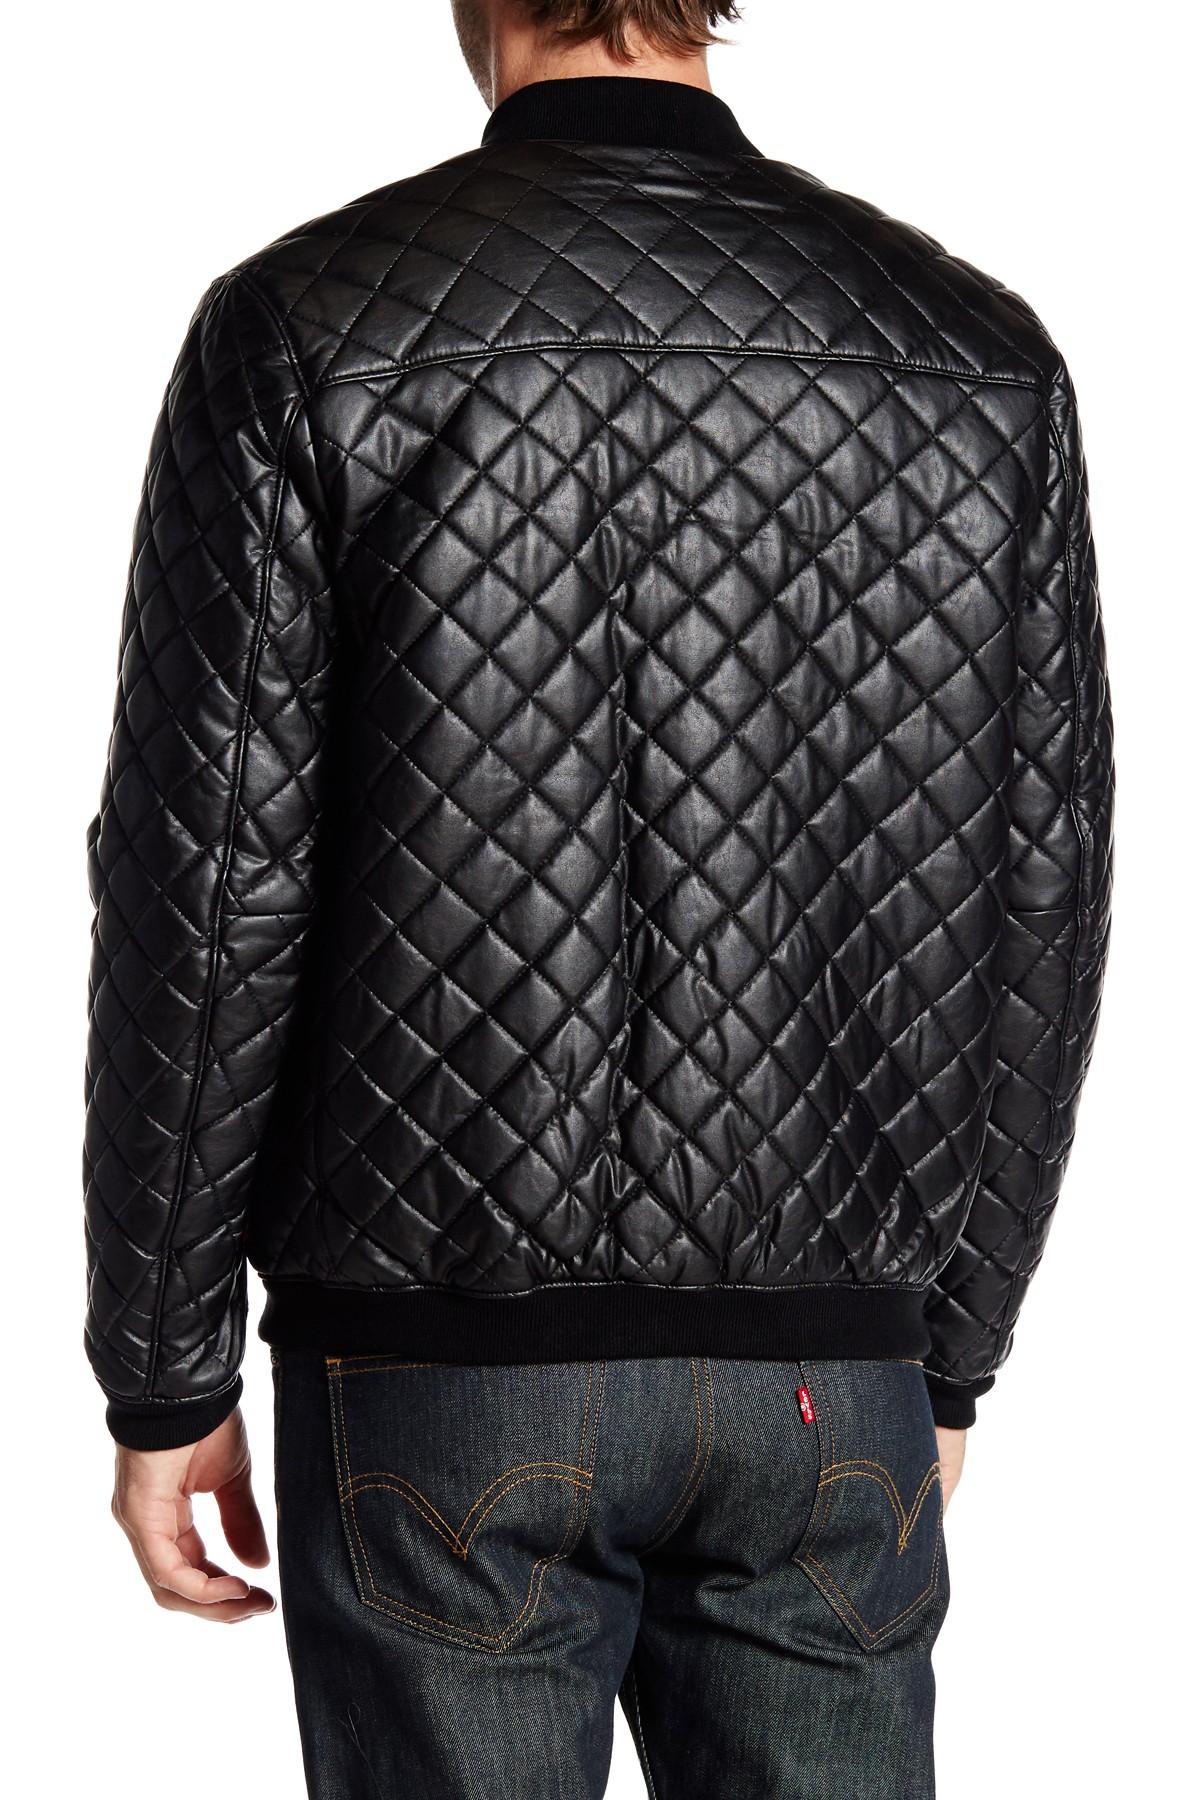 Levi's Faux Leather Diamond Quilted Puffer Bomber Jacket in Black 